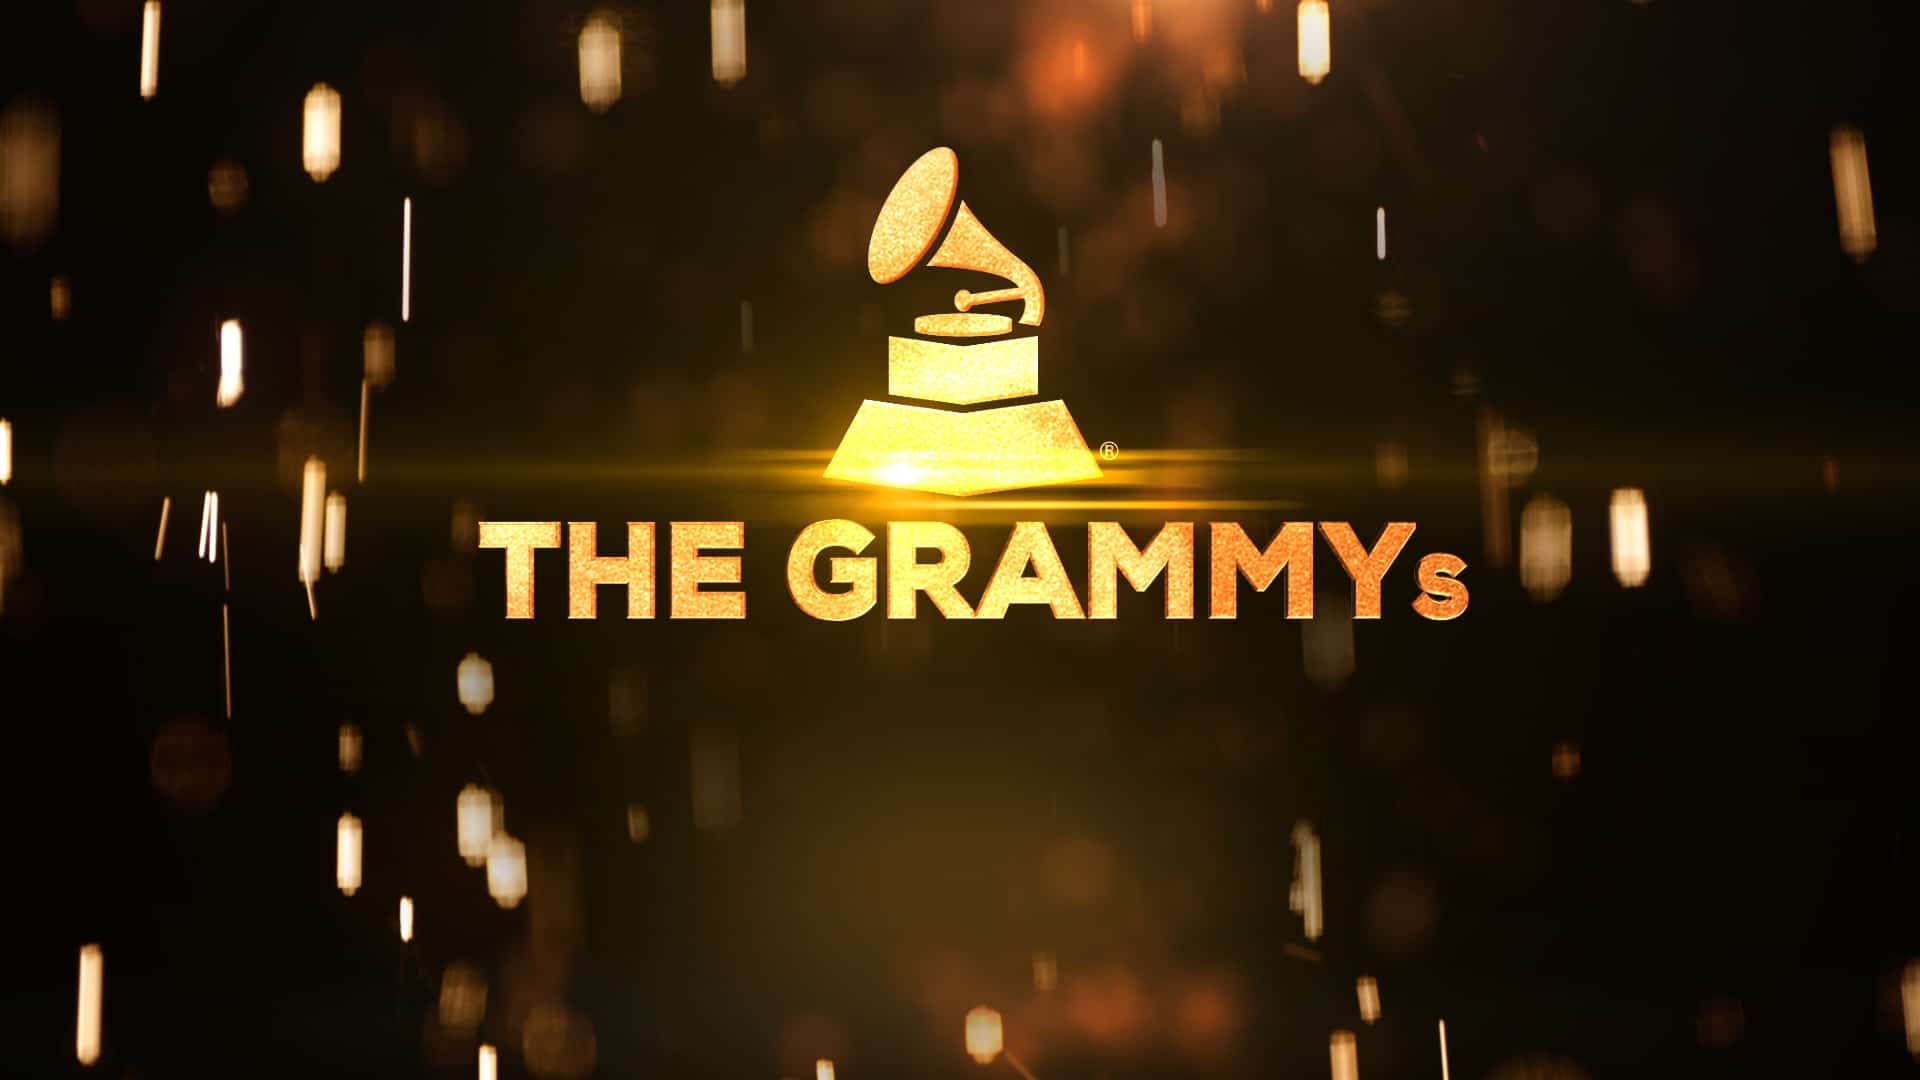 The Grammys is no longer the ‘biggest night in music’